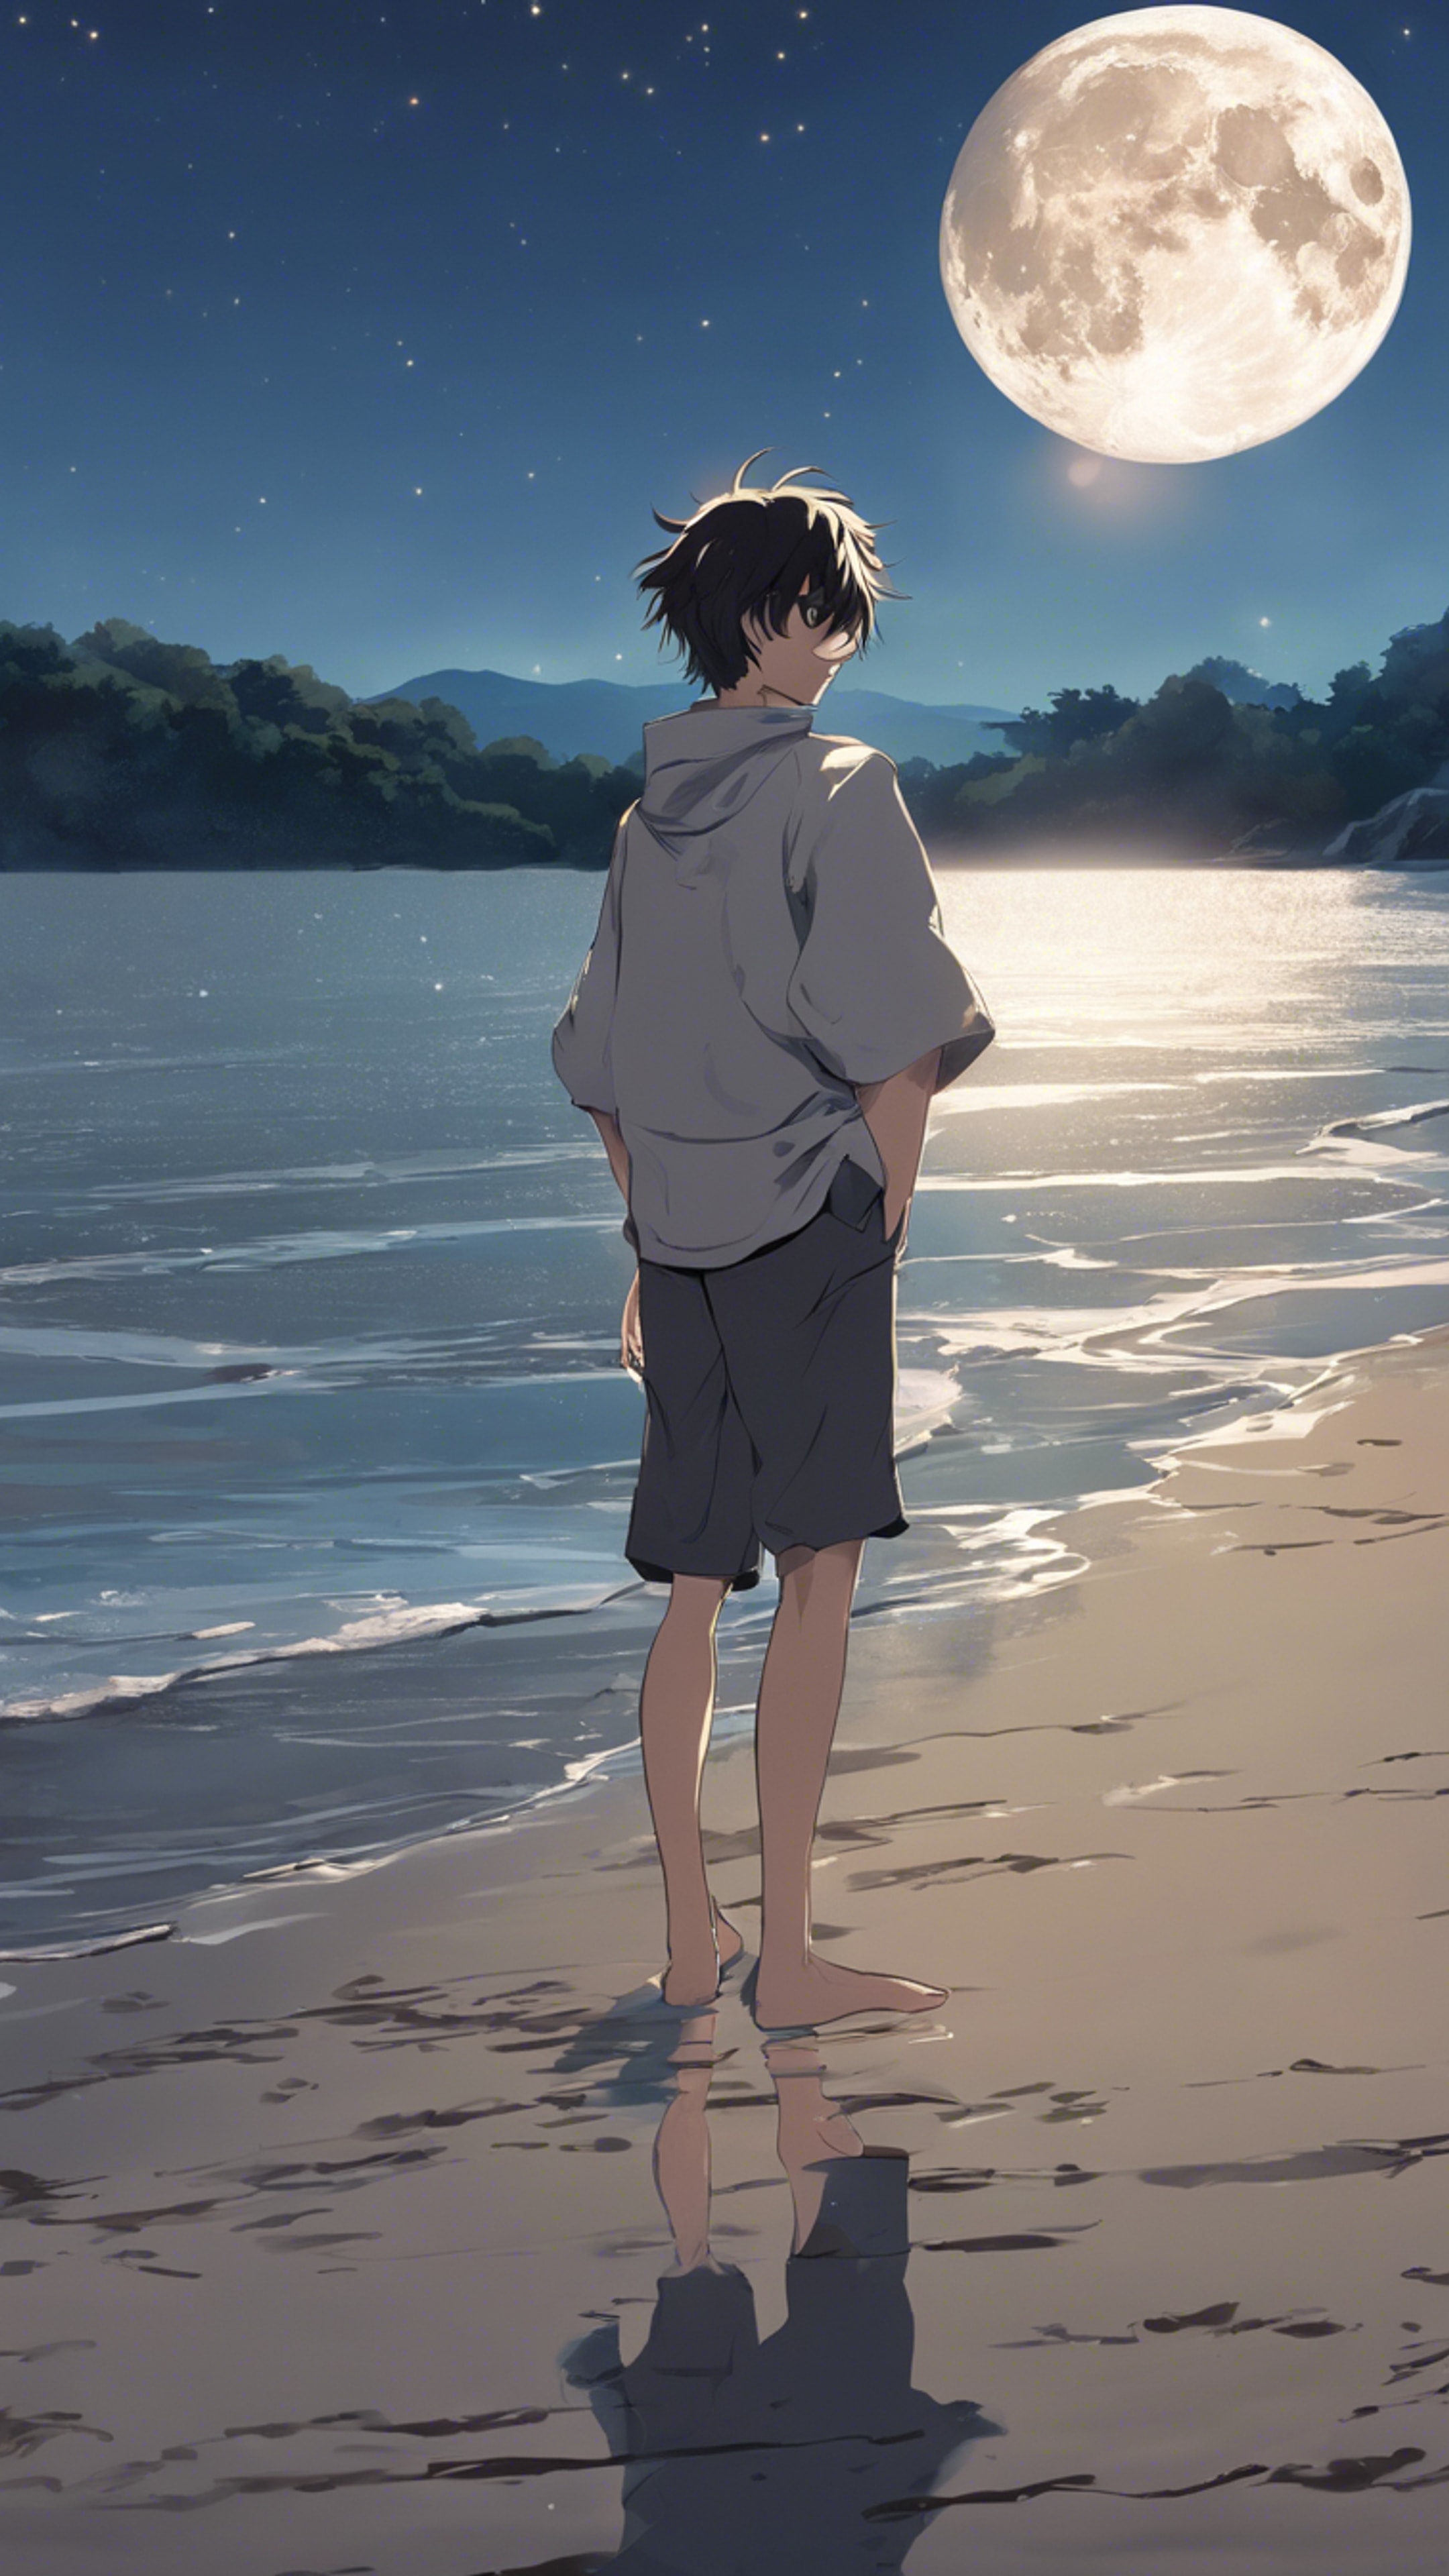 An anime boy standing barefoot on the shore, with the moon reflecting in upturned, joyous eyes. טפט[a80f9c3e465041ad9759]